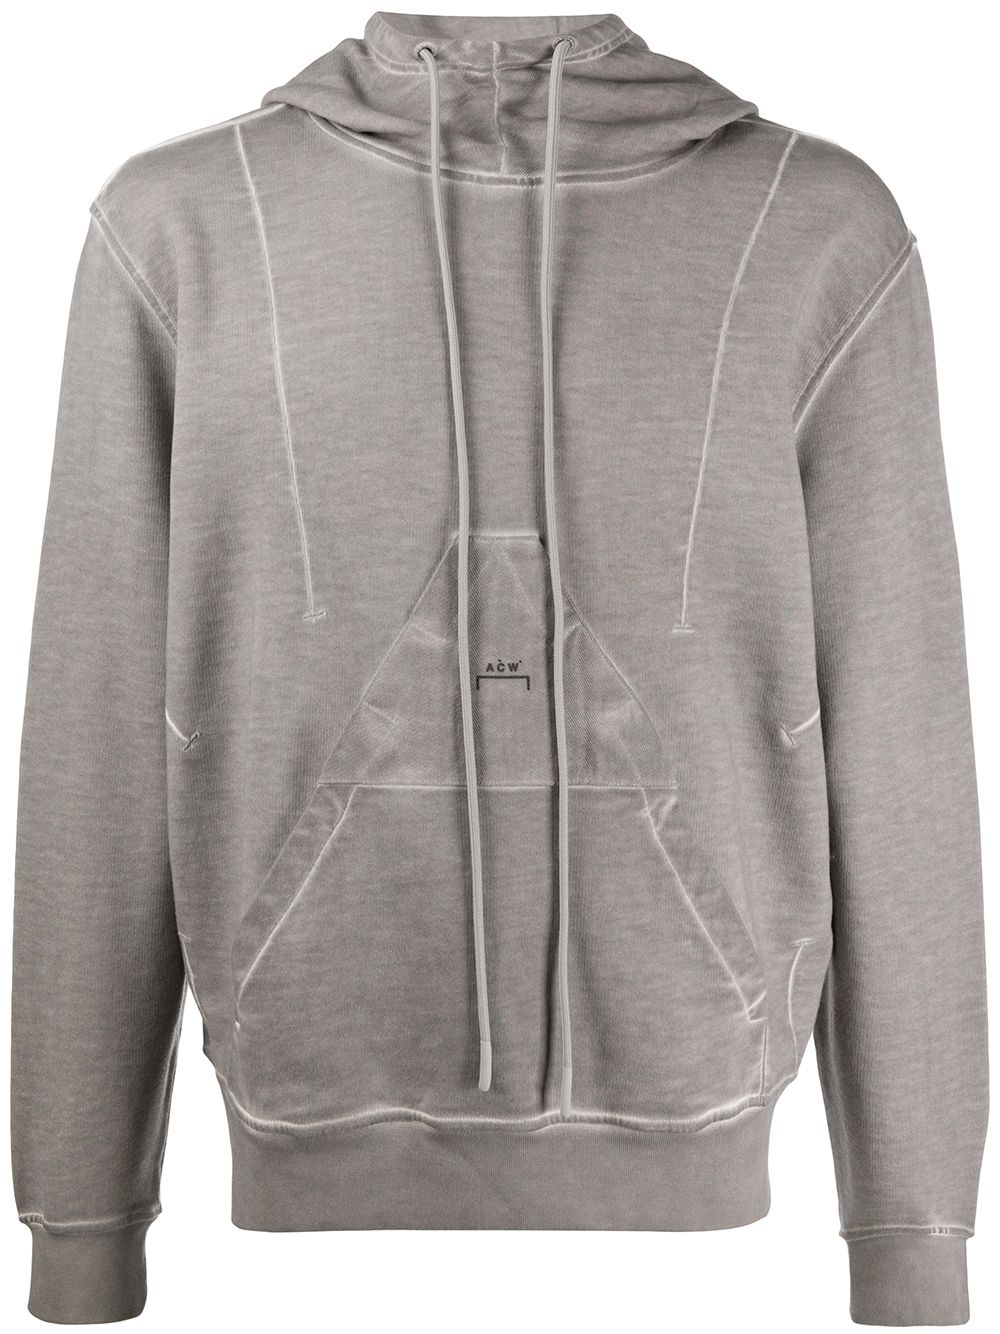 A-COLD-WALL* x A-COLD-WALL* logo hoodie - Grey von A-COLD-WALL*